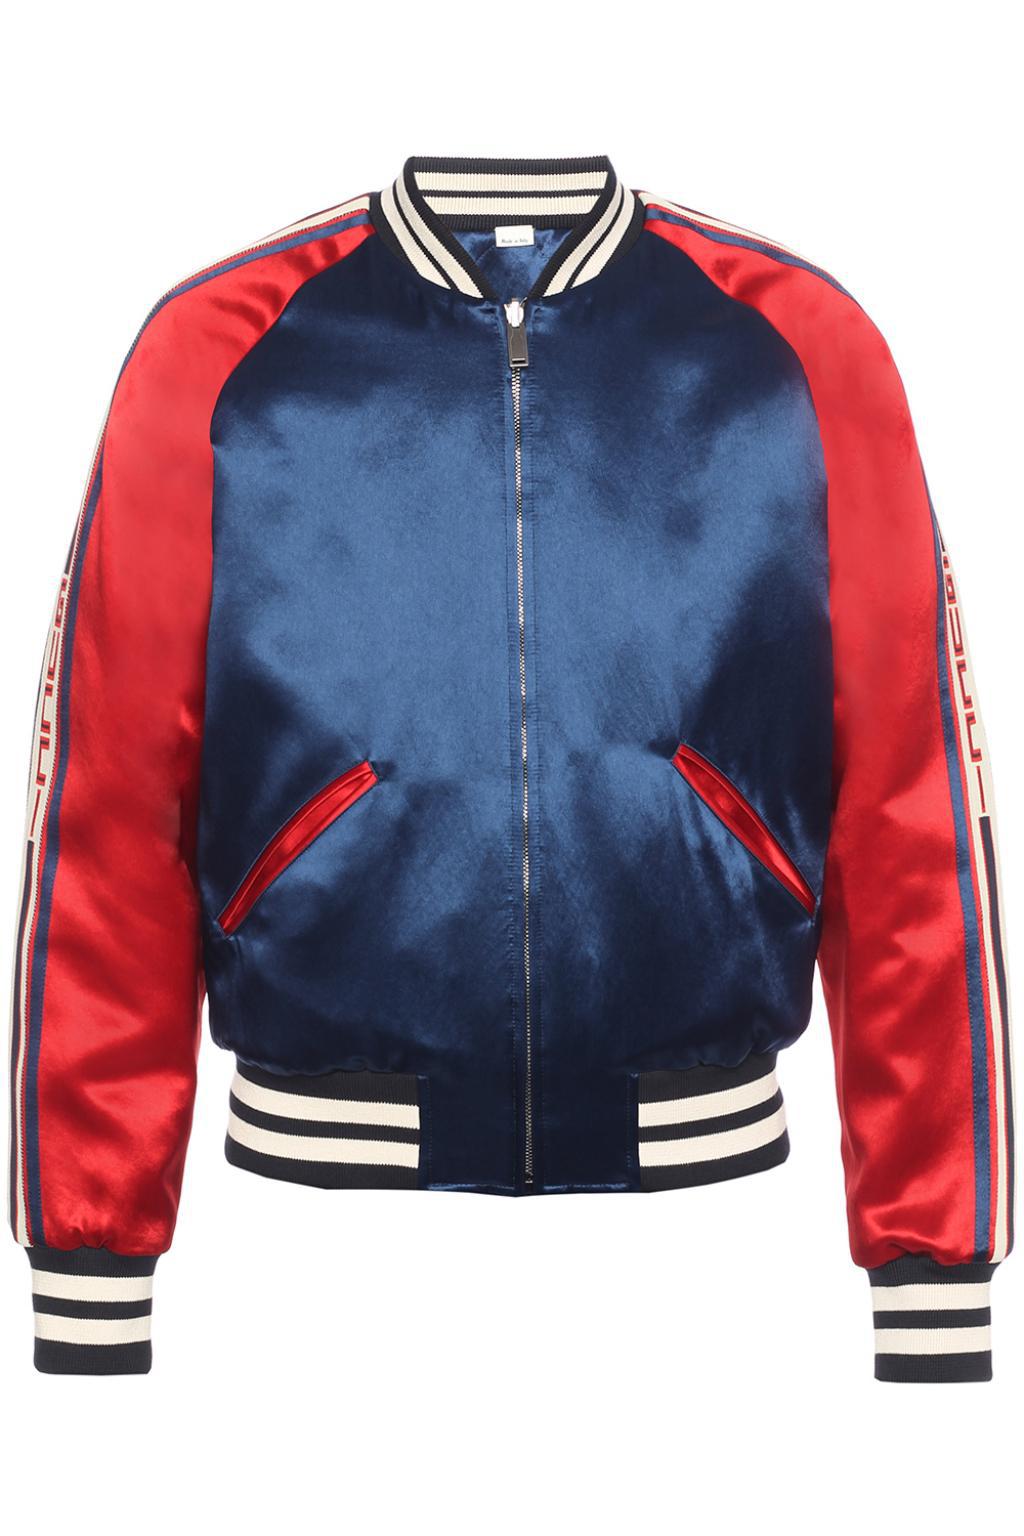 Gucci Stripe Reversible Acetate Bomber in Blue, Red (Blue) for Men - Lyst